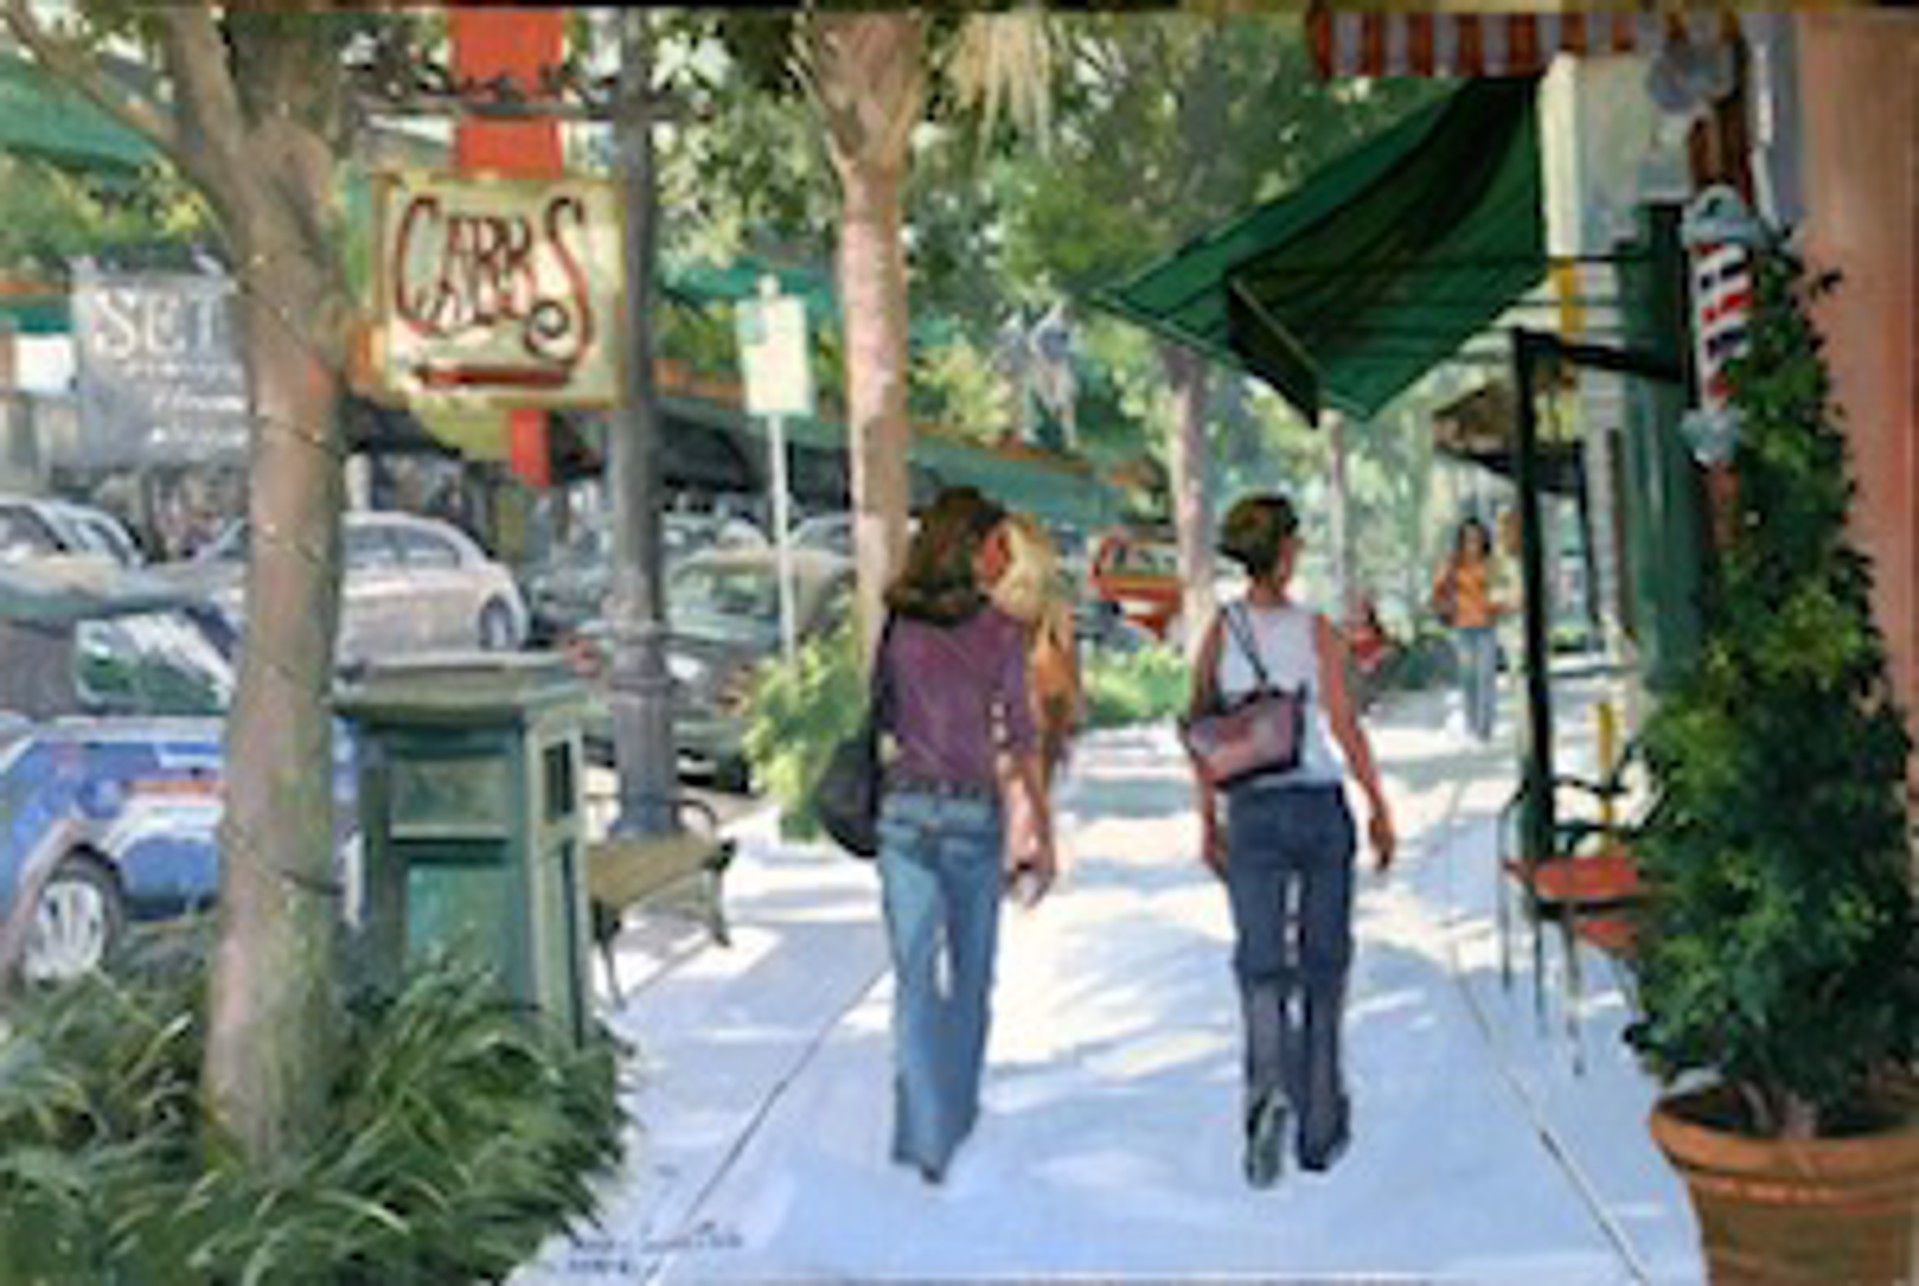 Shopping on Park Avenue by Morgan Samuel Price